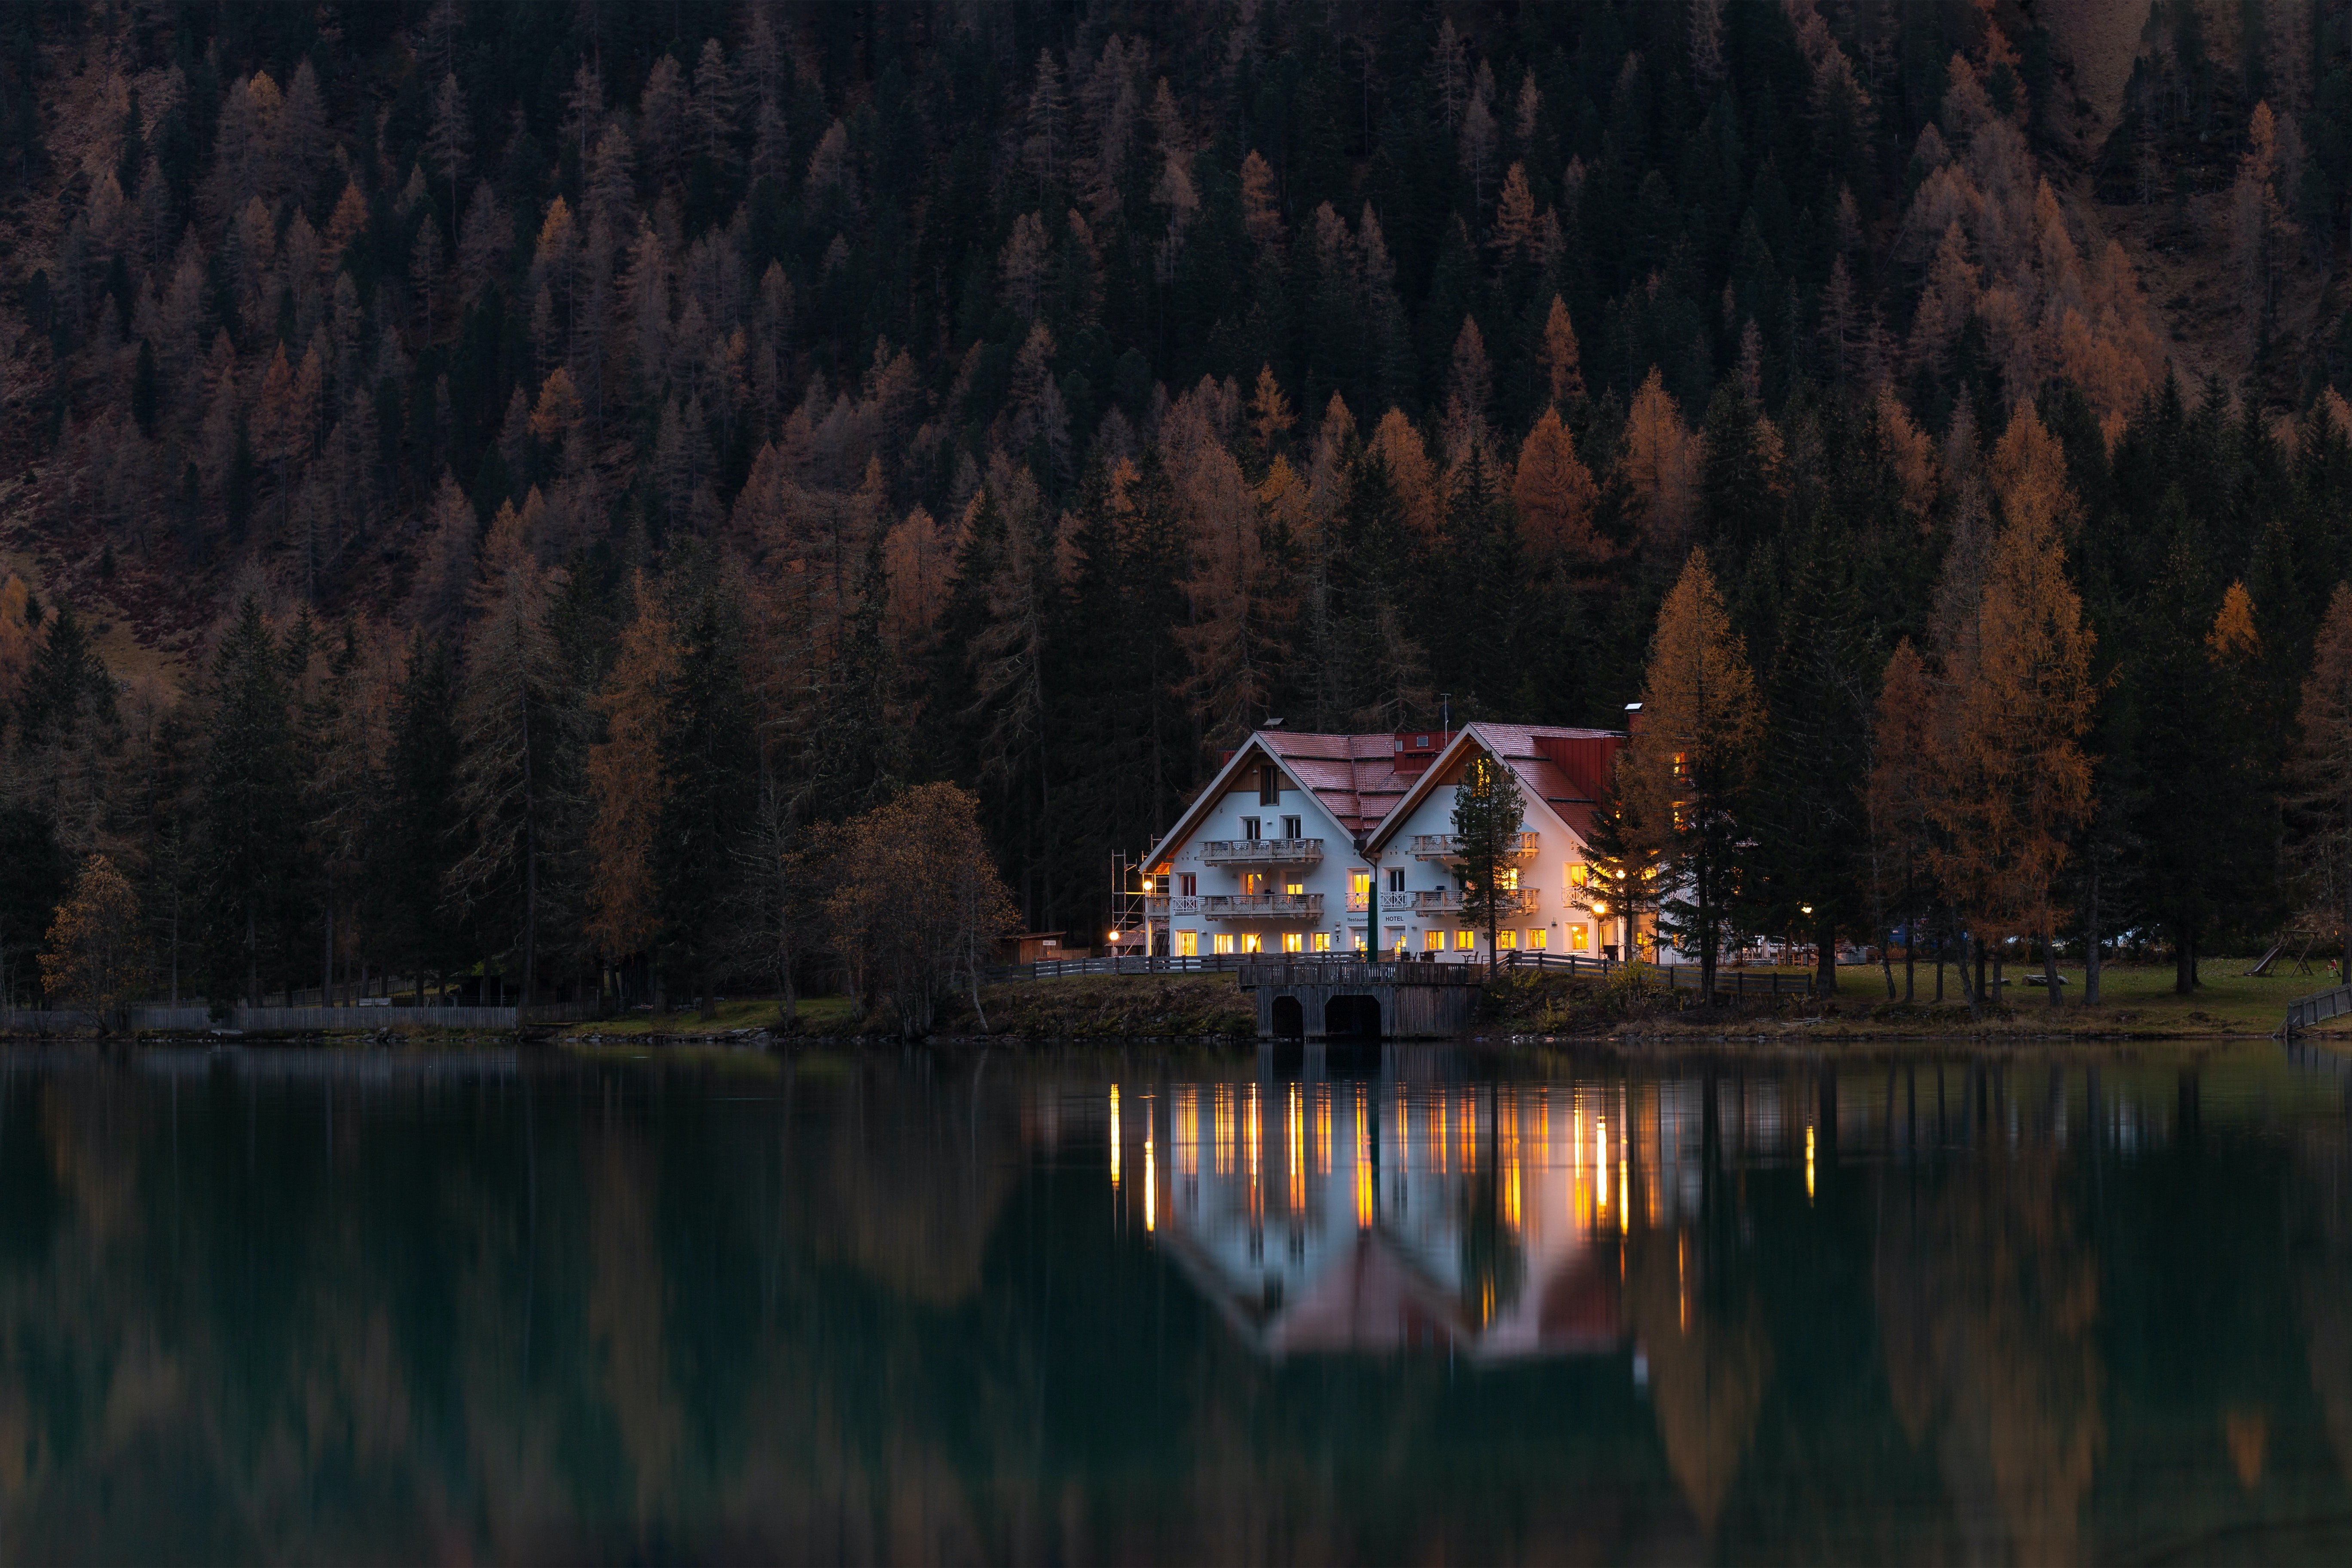 Patrick noticed that a mansion had been built across the lake. | Source: Eberhard Grossgasteiger/Pexels